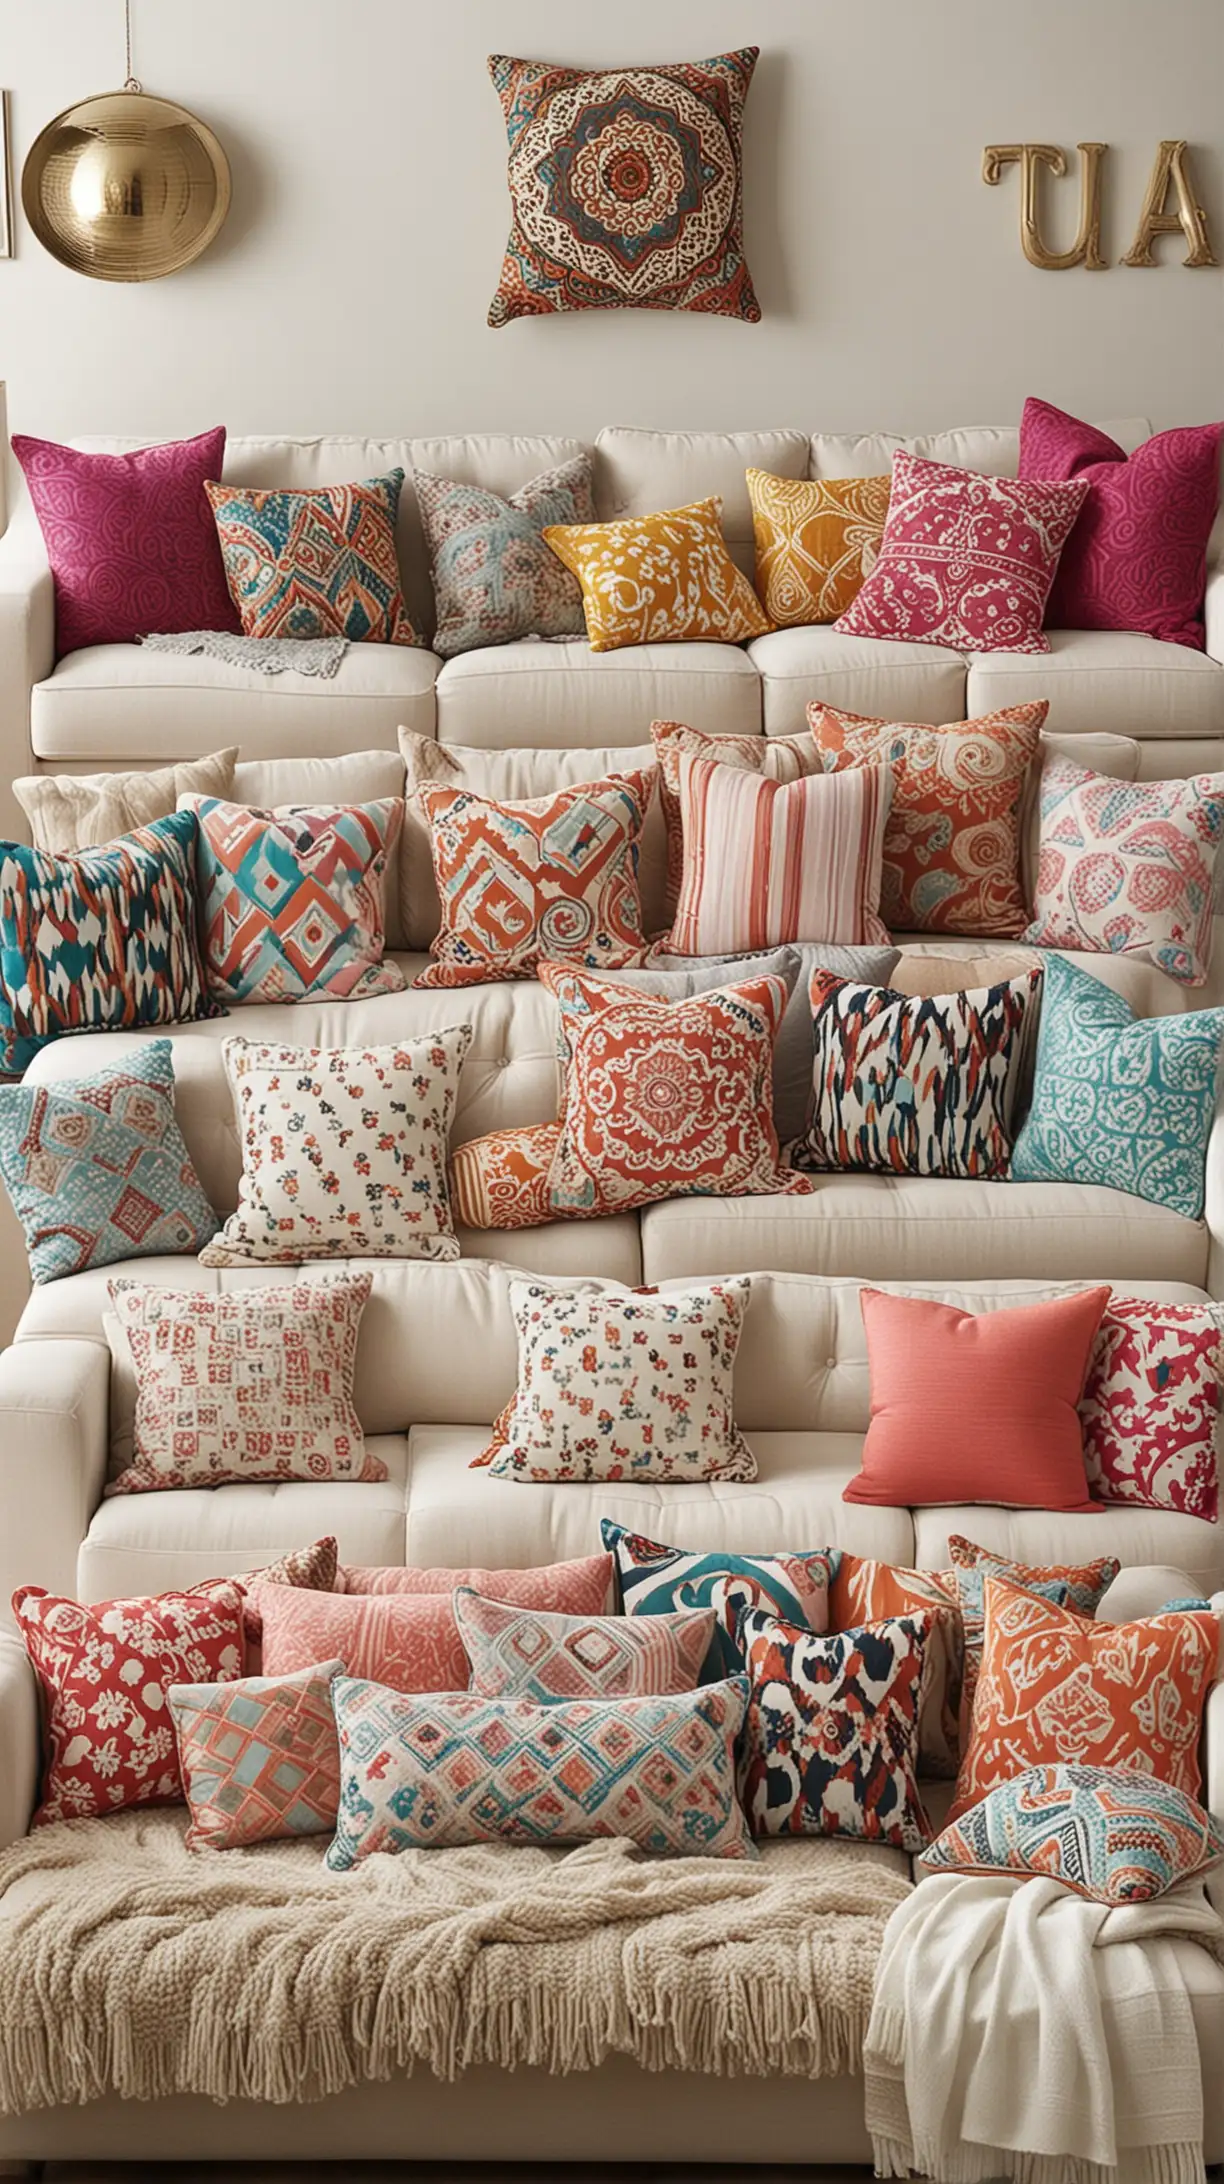 Create picture for Dorm Living Room Decor and make sure it should be attractive and realistic. Make sure that every single object in the picture should be clear means full overview of the idea not a single object. Here's the idea to create the picture [Decorative Throw Pillows

A mix of throw pillows on my seating not only makes things comfier but also adds pops of color throughout the room.] mother fucker show them in living room not give just the image of item